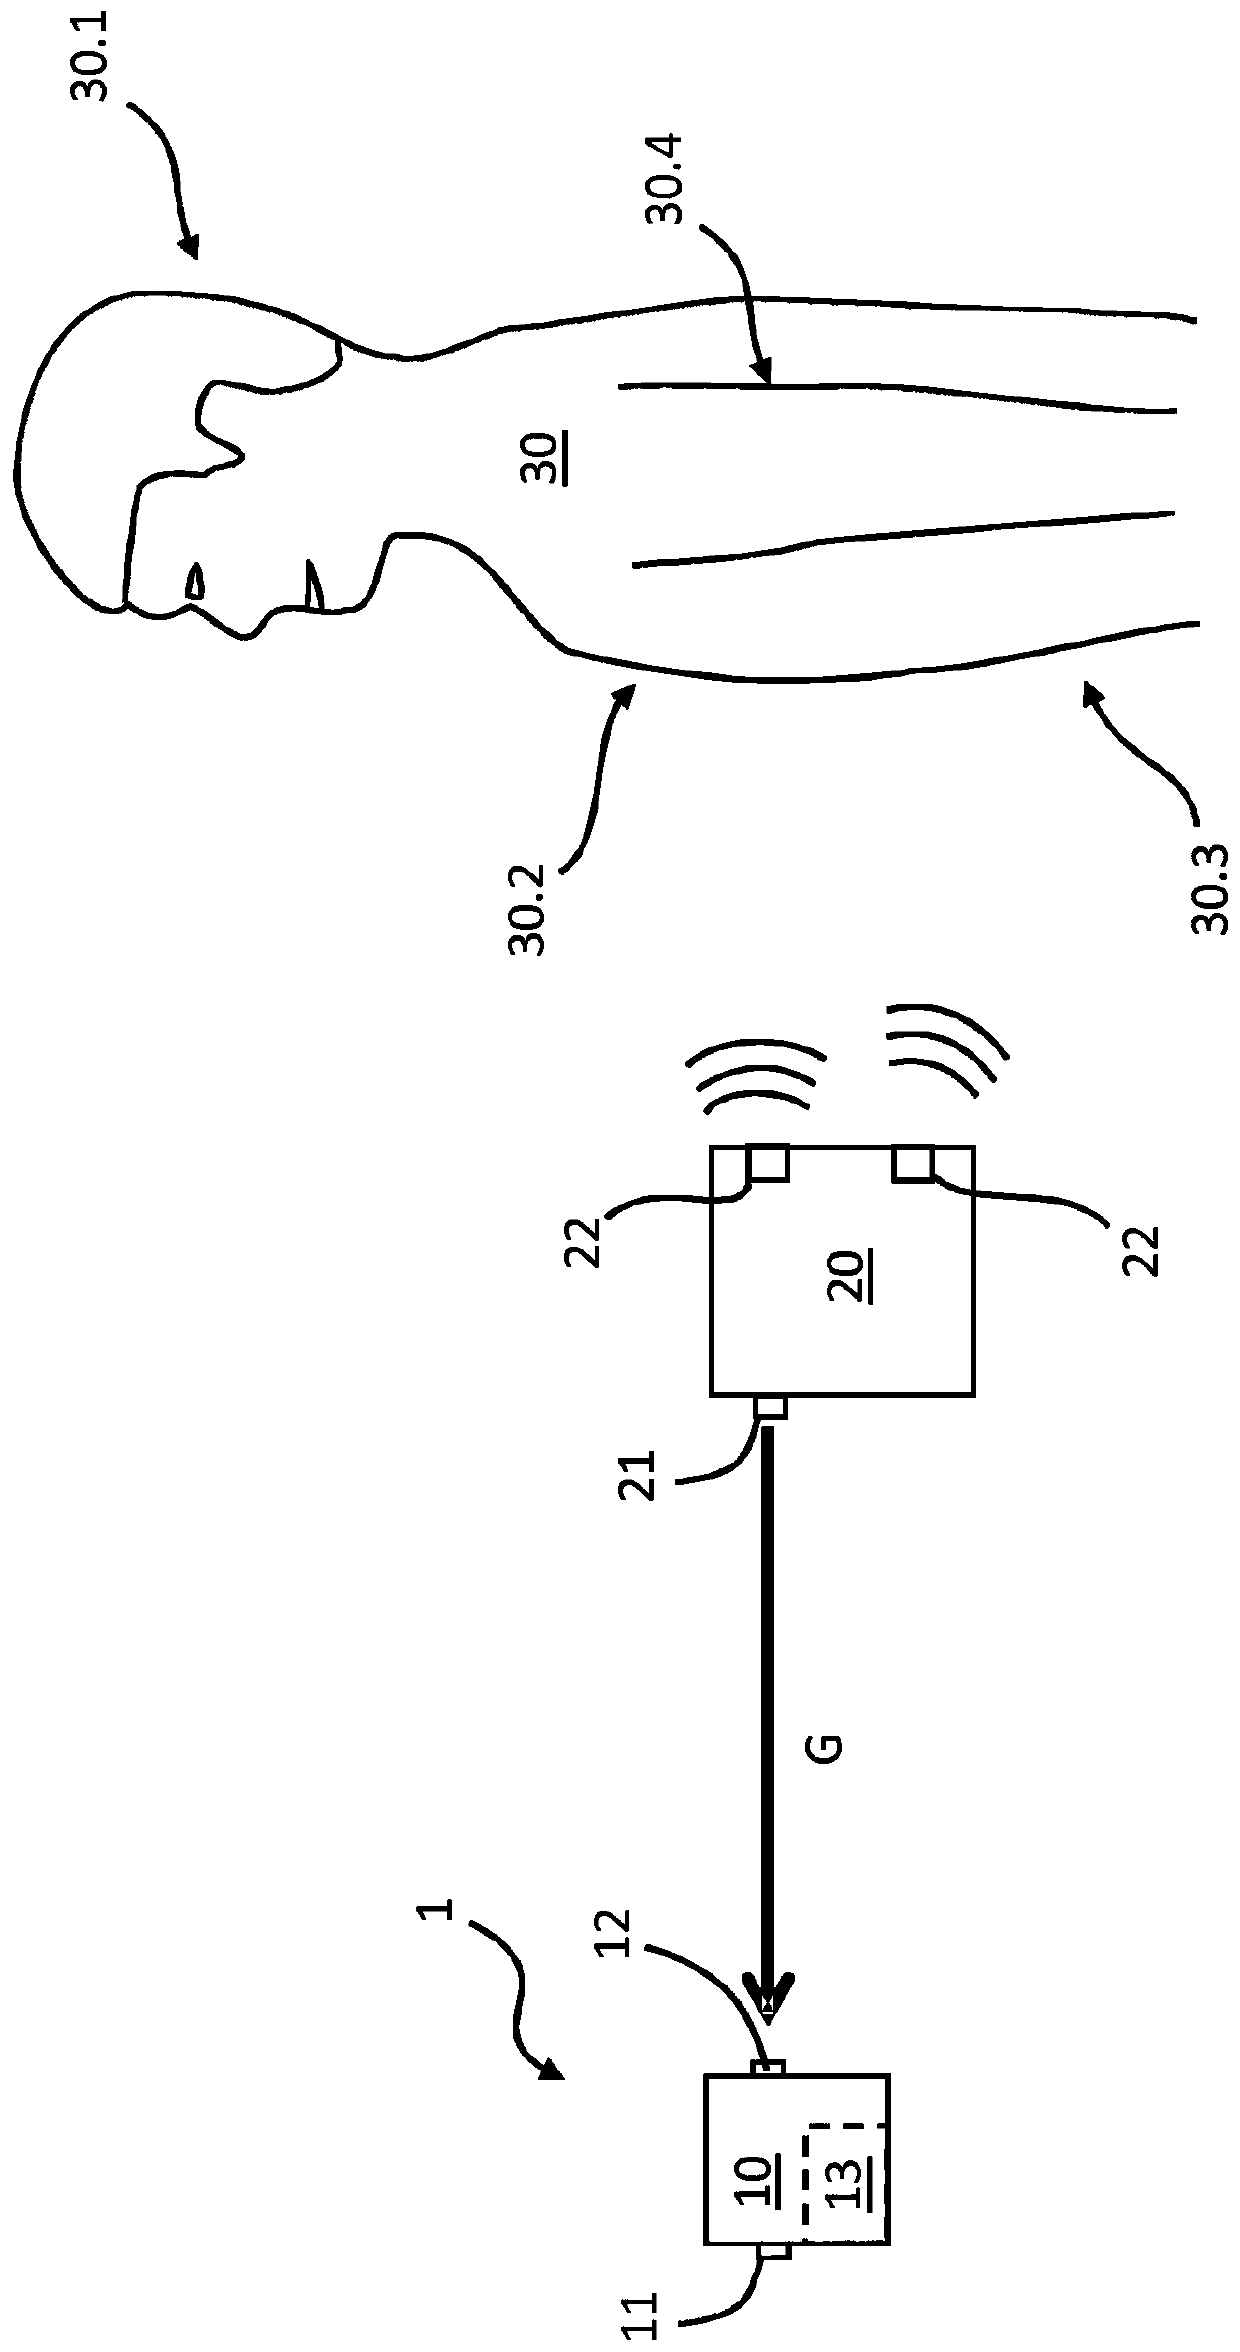 Method and system for breathing monitoring